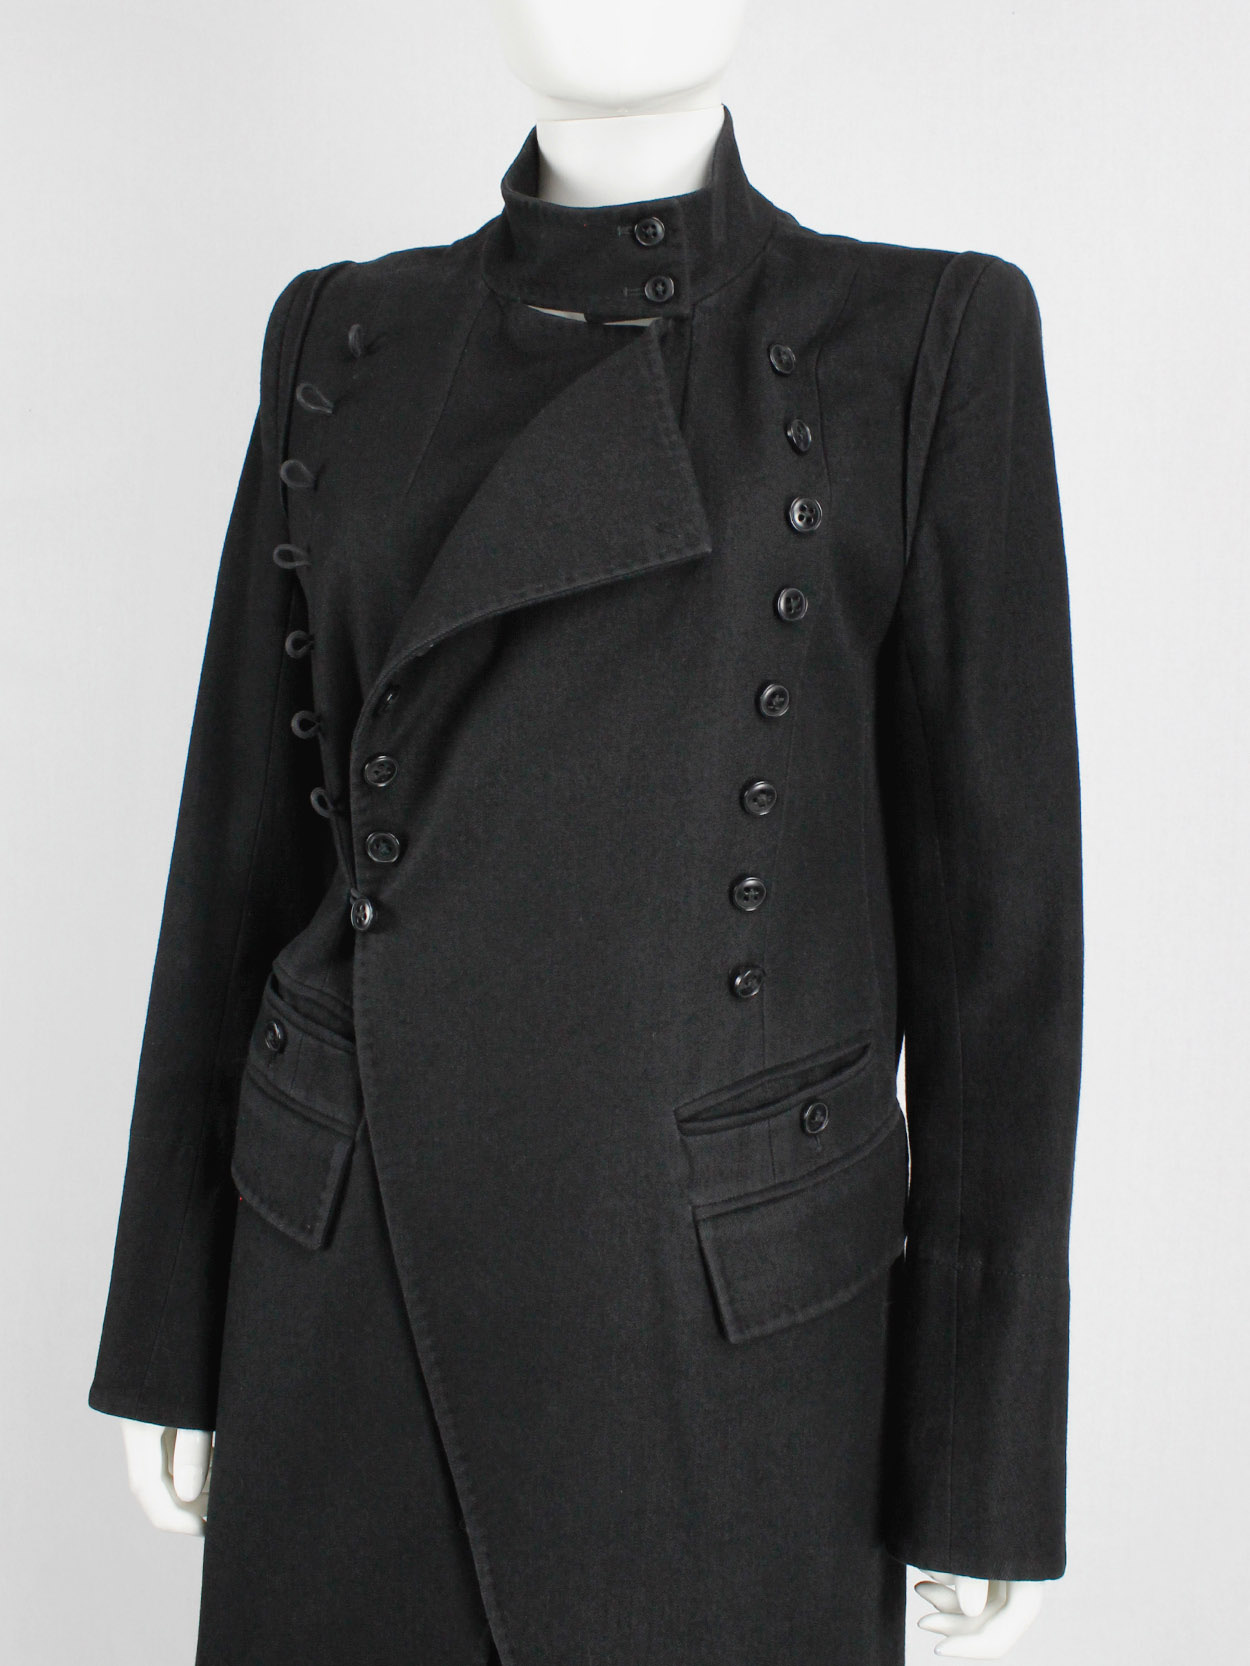 Ann Demeulemeester black double breasted military coat fall 2005 (4)